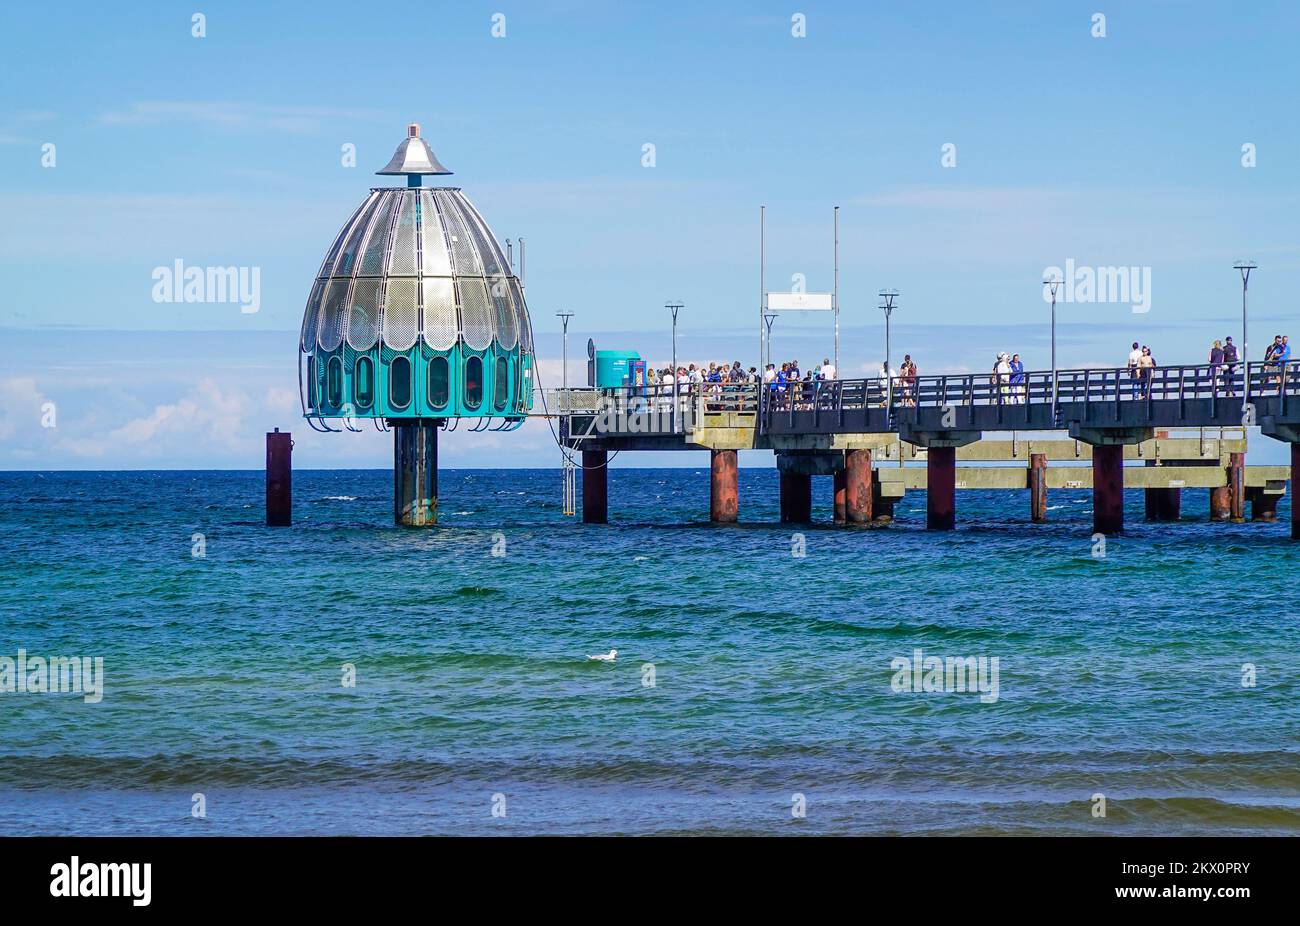 seebrucke - and photography stock hi-res Zingst Alamy images